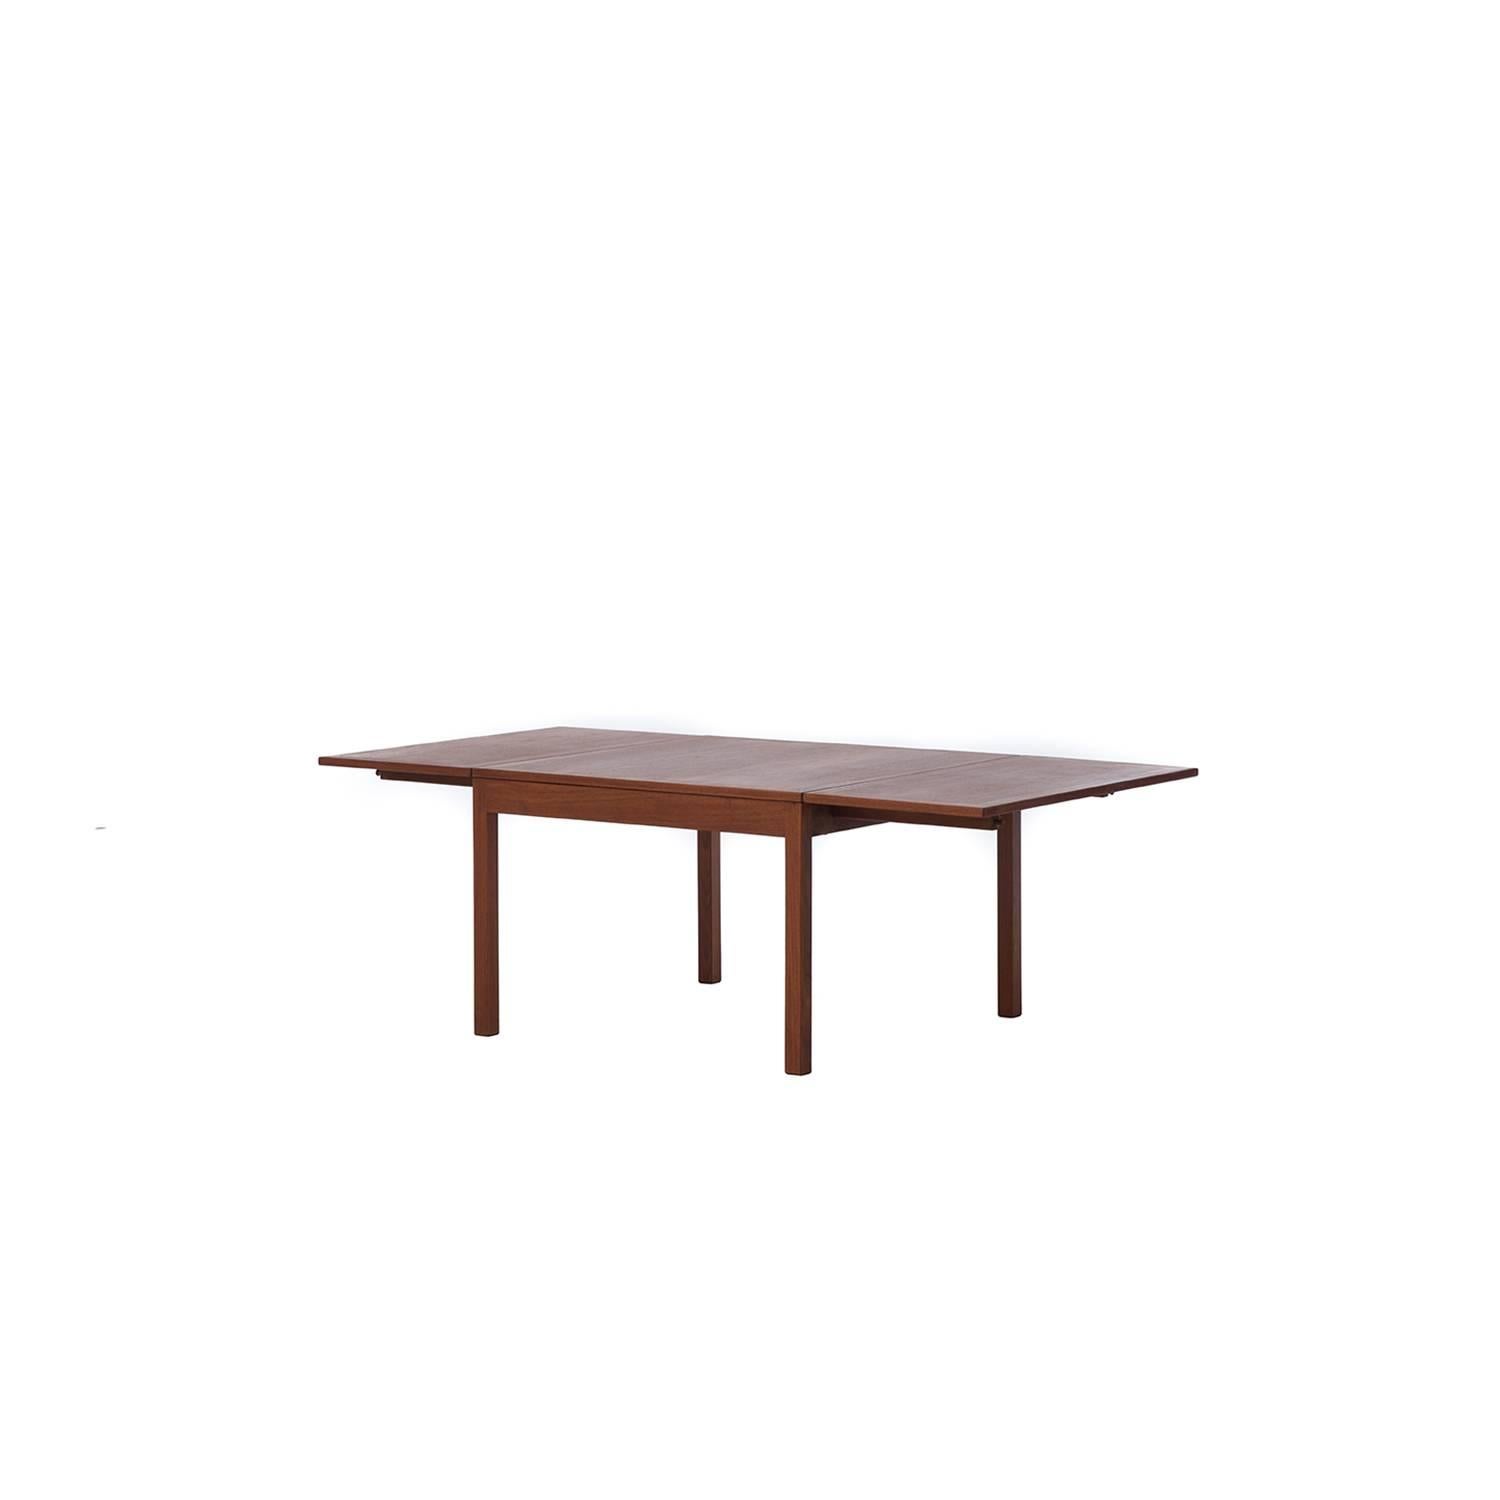 This lovely original Danish Modern coffee, designed by Børge Mogensen, can be used as a square or a wide rectangle depending upon the position of the leaves. The teak is rich and deep toned, with an oil finish.